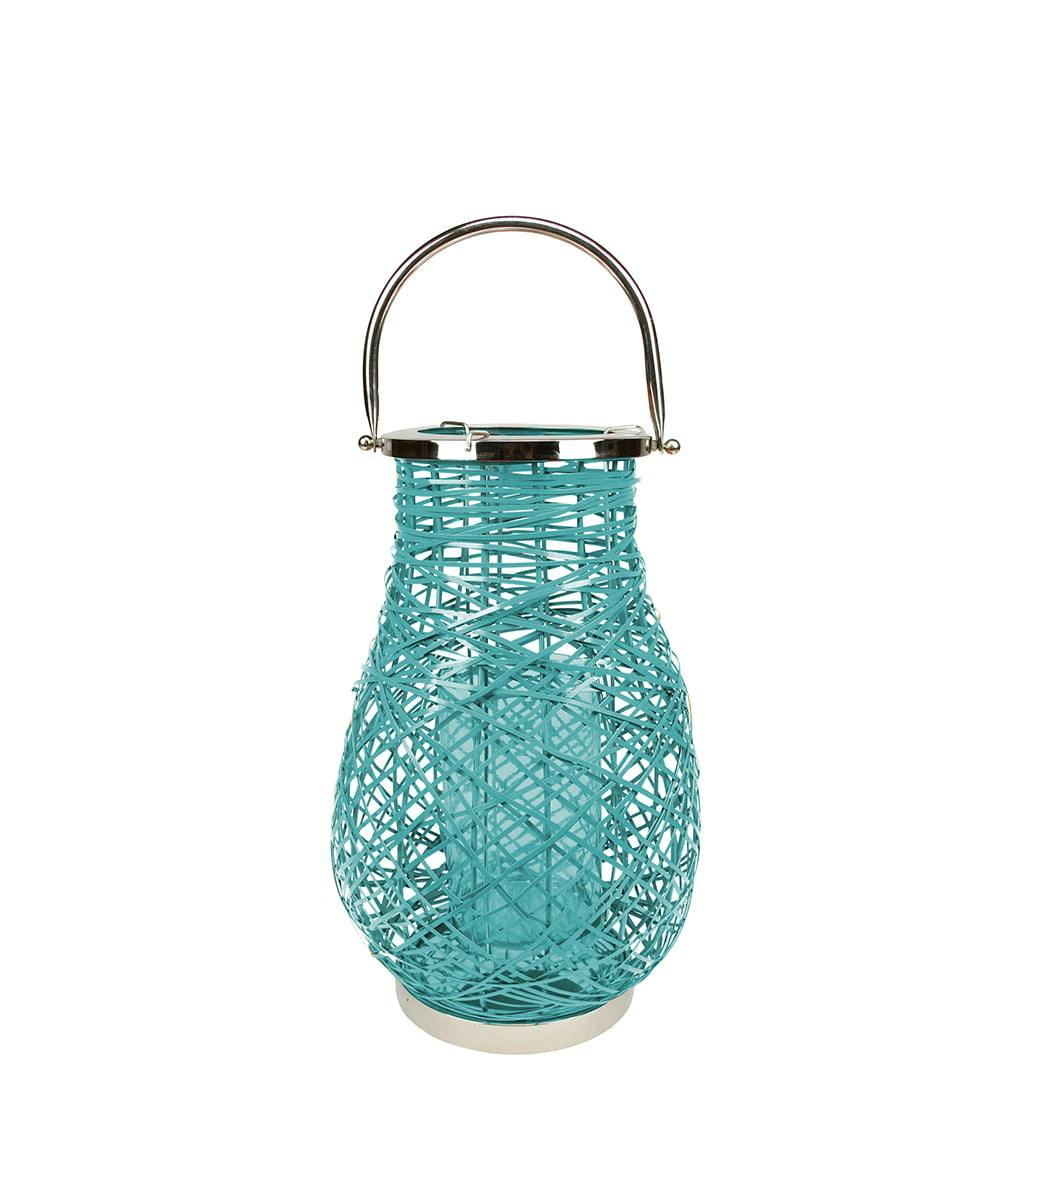 Turquoise Blue Woven Iron 16.25" Hanging Candle Lantern with Glass Hurricane